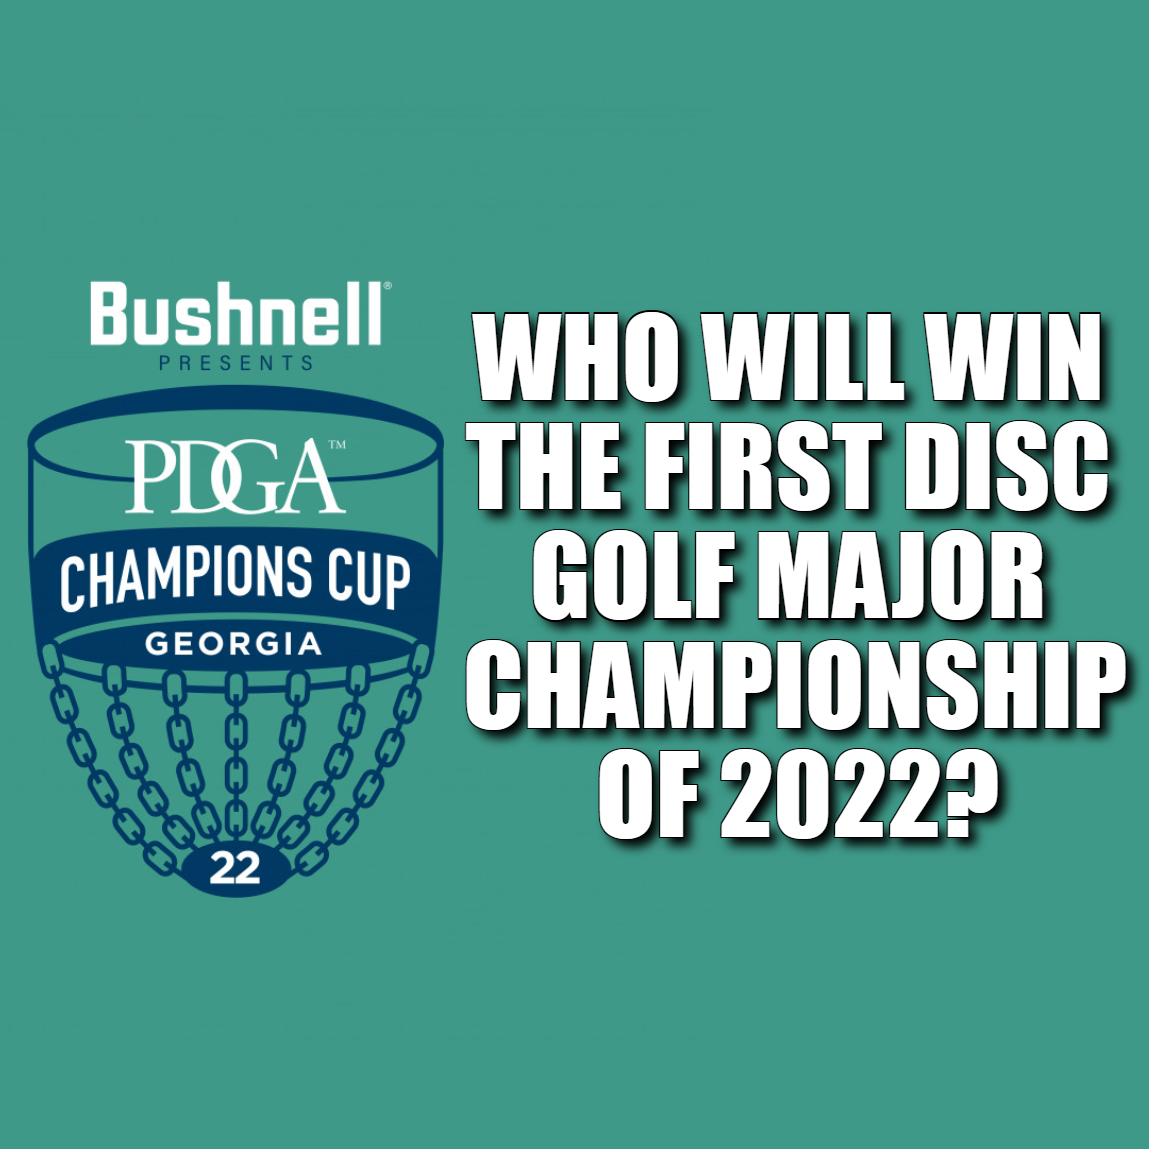 PDGA Champions Cup Preview - Who Will Win the First Disc Golf Major Championship of 2022